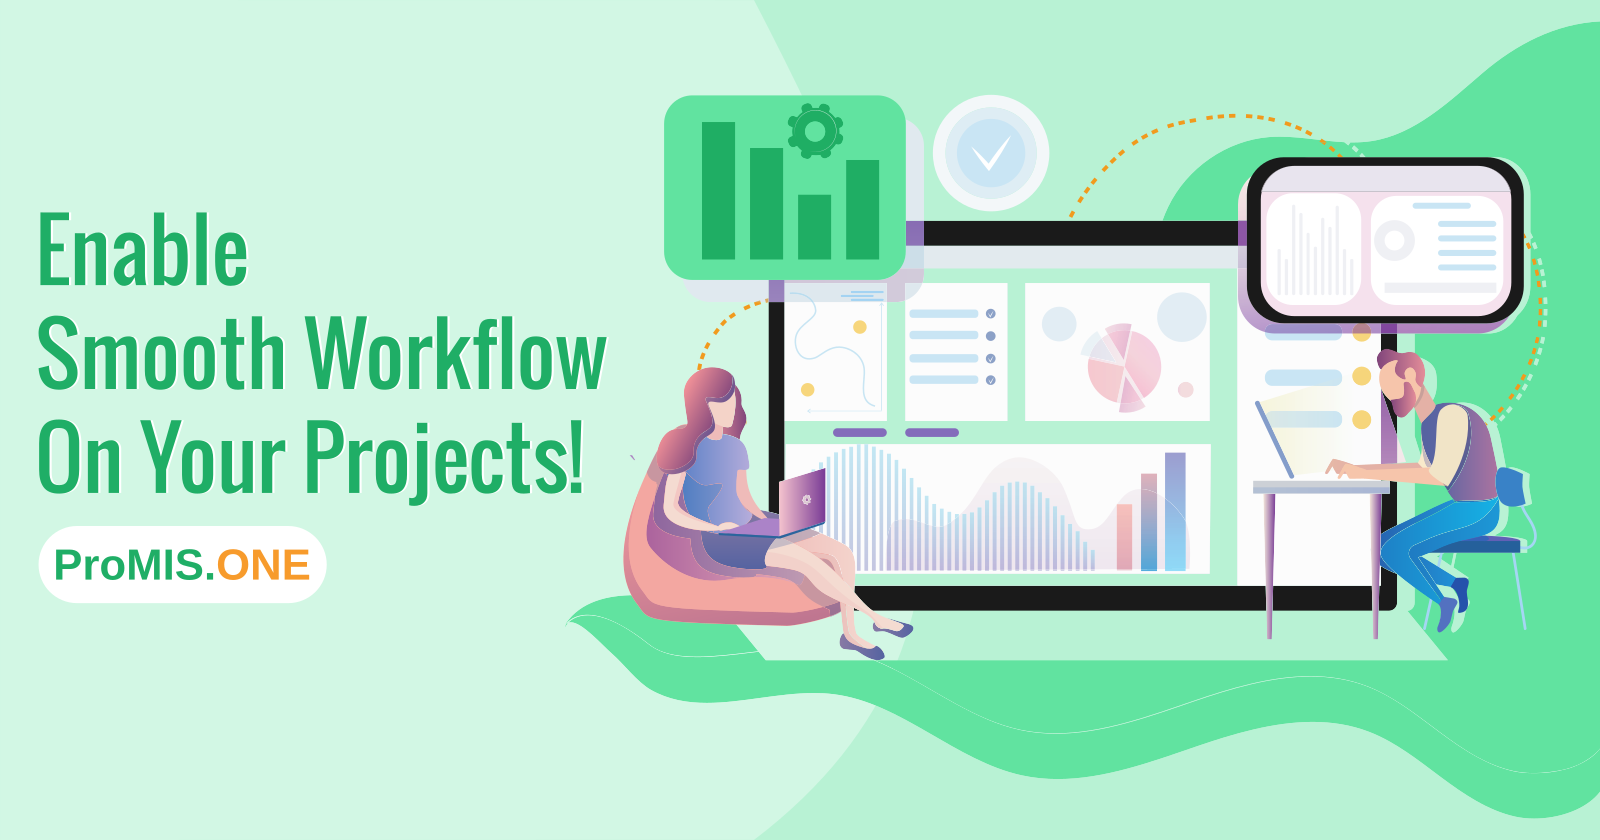 Enable Smooth Workflow On Your Projects!